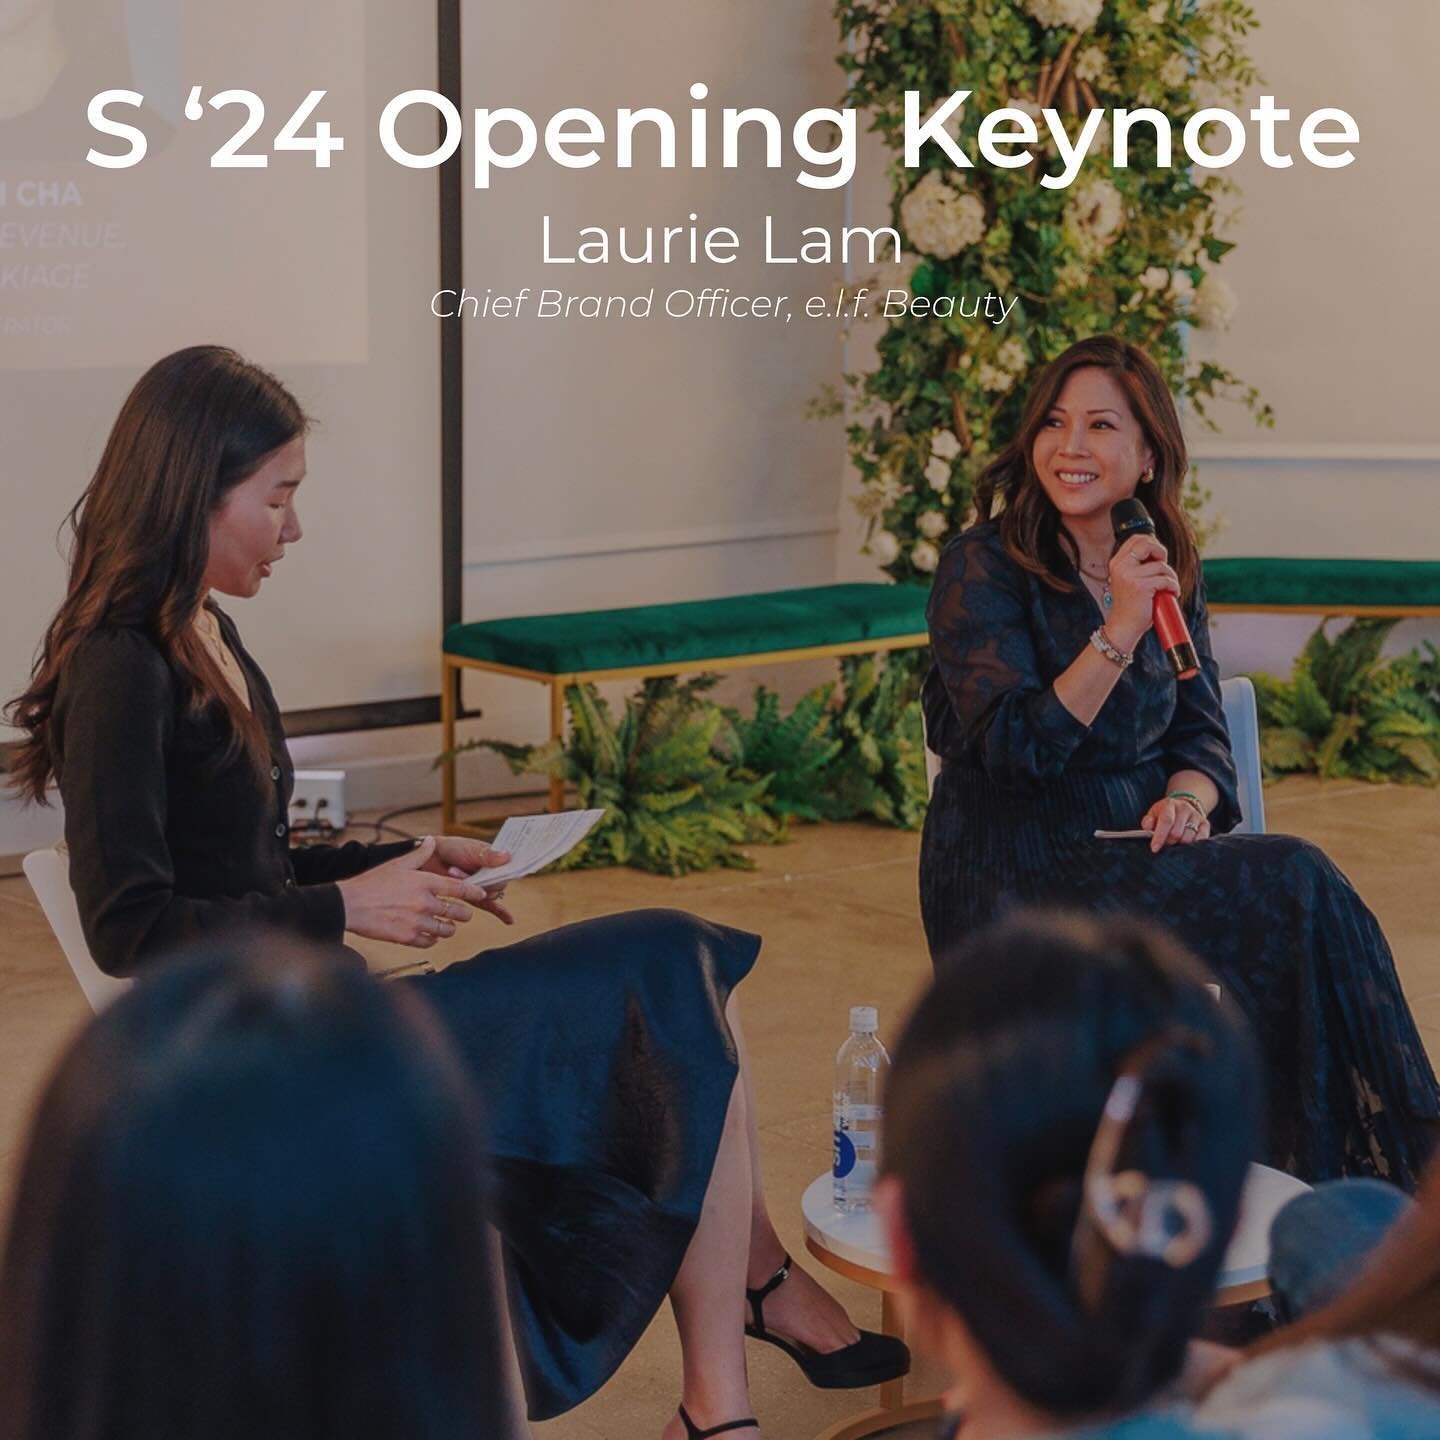 And just like that, we&rsquo;ve kicked off our S &lsquo;24 Accelerator! 🥂🚀

Thank you so much to Laurie Lam, Chief Brand Officer of @elfcosmetics, for being our opening keynote speaker, and for sharing your experience around career growth, mentorsh